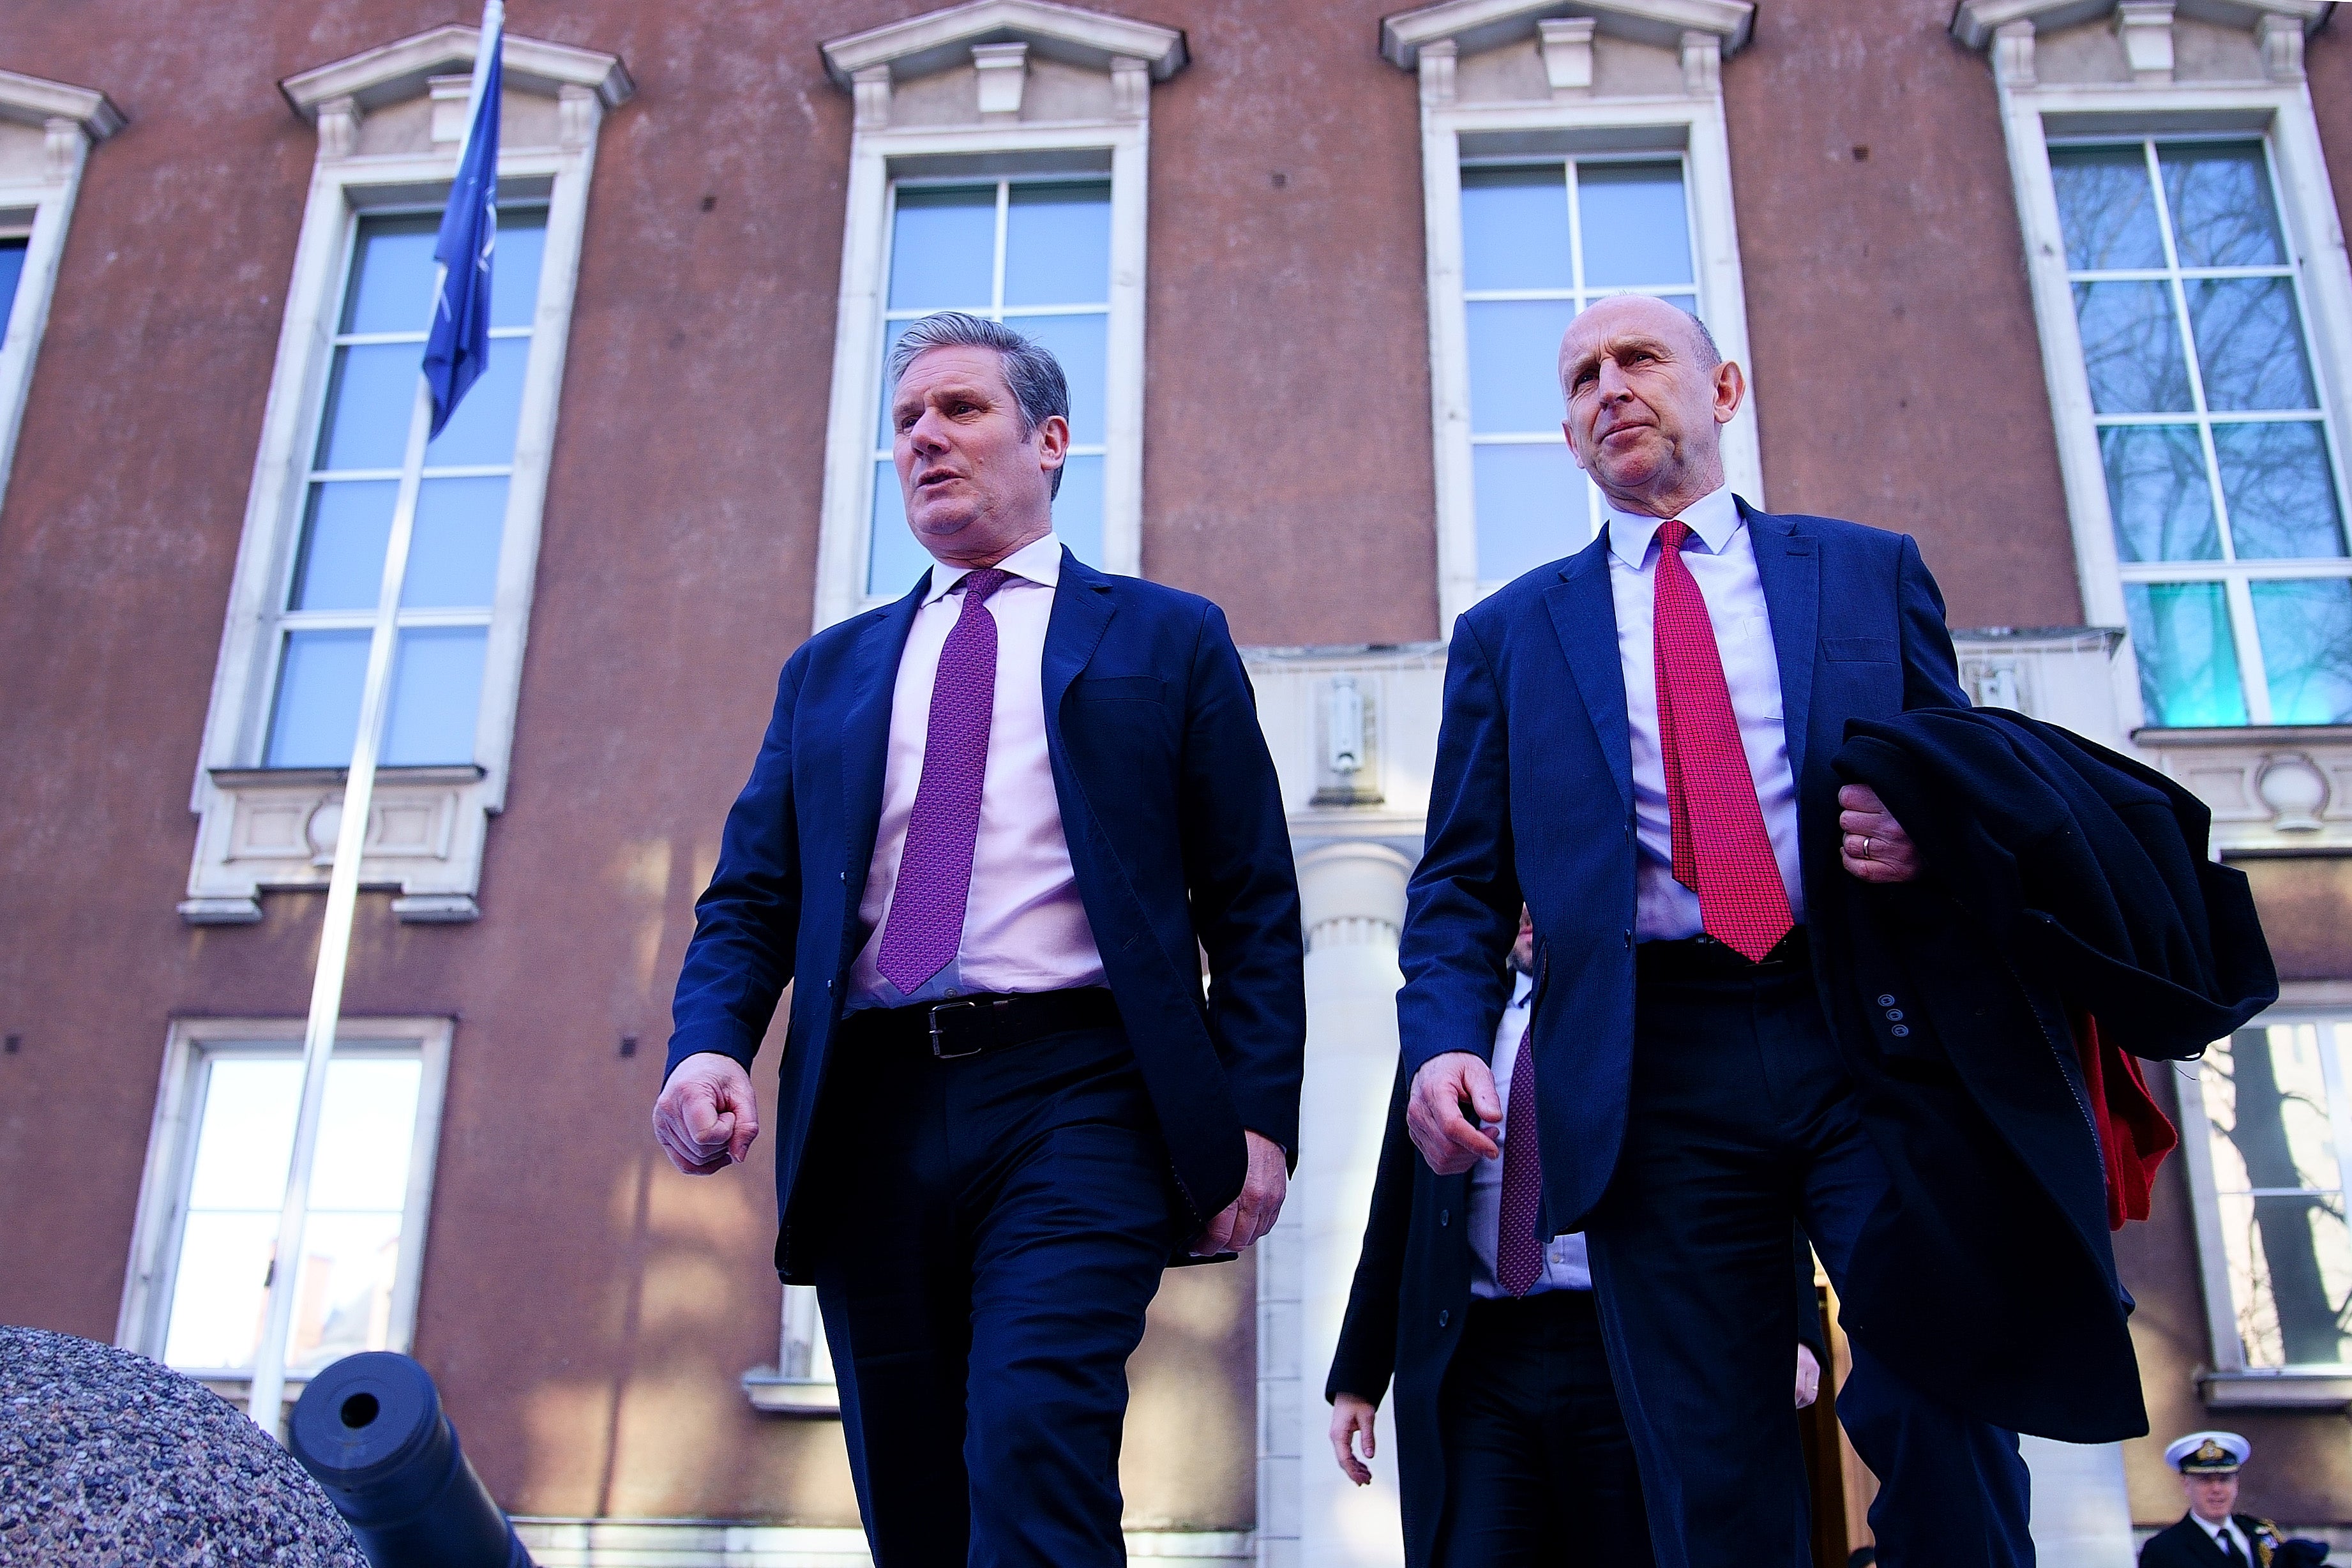 Labour leader Sir Keir Starmer and shadow defence secretary John Healey leave the Ministry of Defence in Tallinn on Thursday (Victoria Jones/PA)